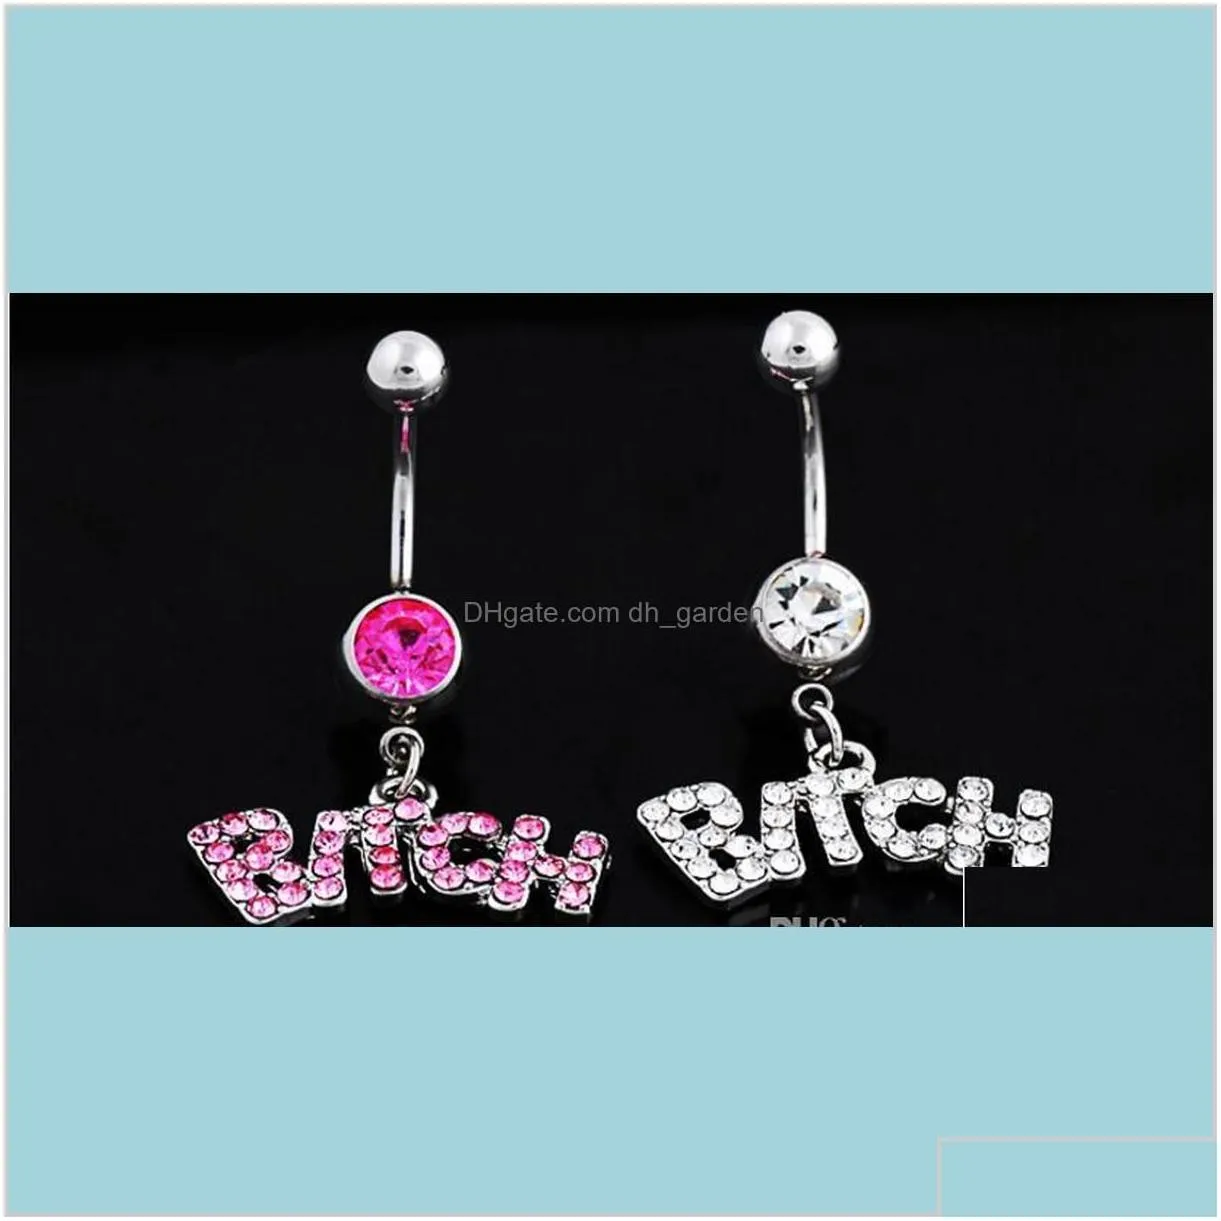 Silverpink Sexy Crystal Body Piercing Surgical Belly Ring Jewelry Bar Fgjat Bell Rings Ajhpd